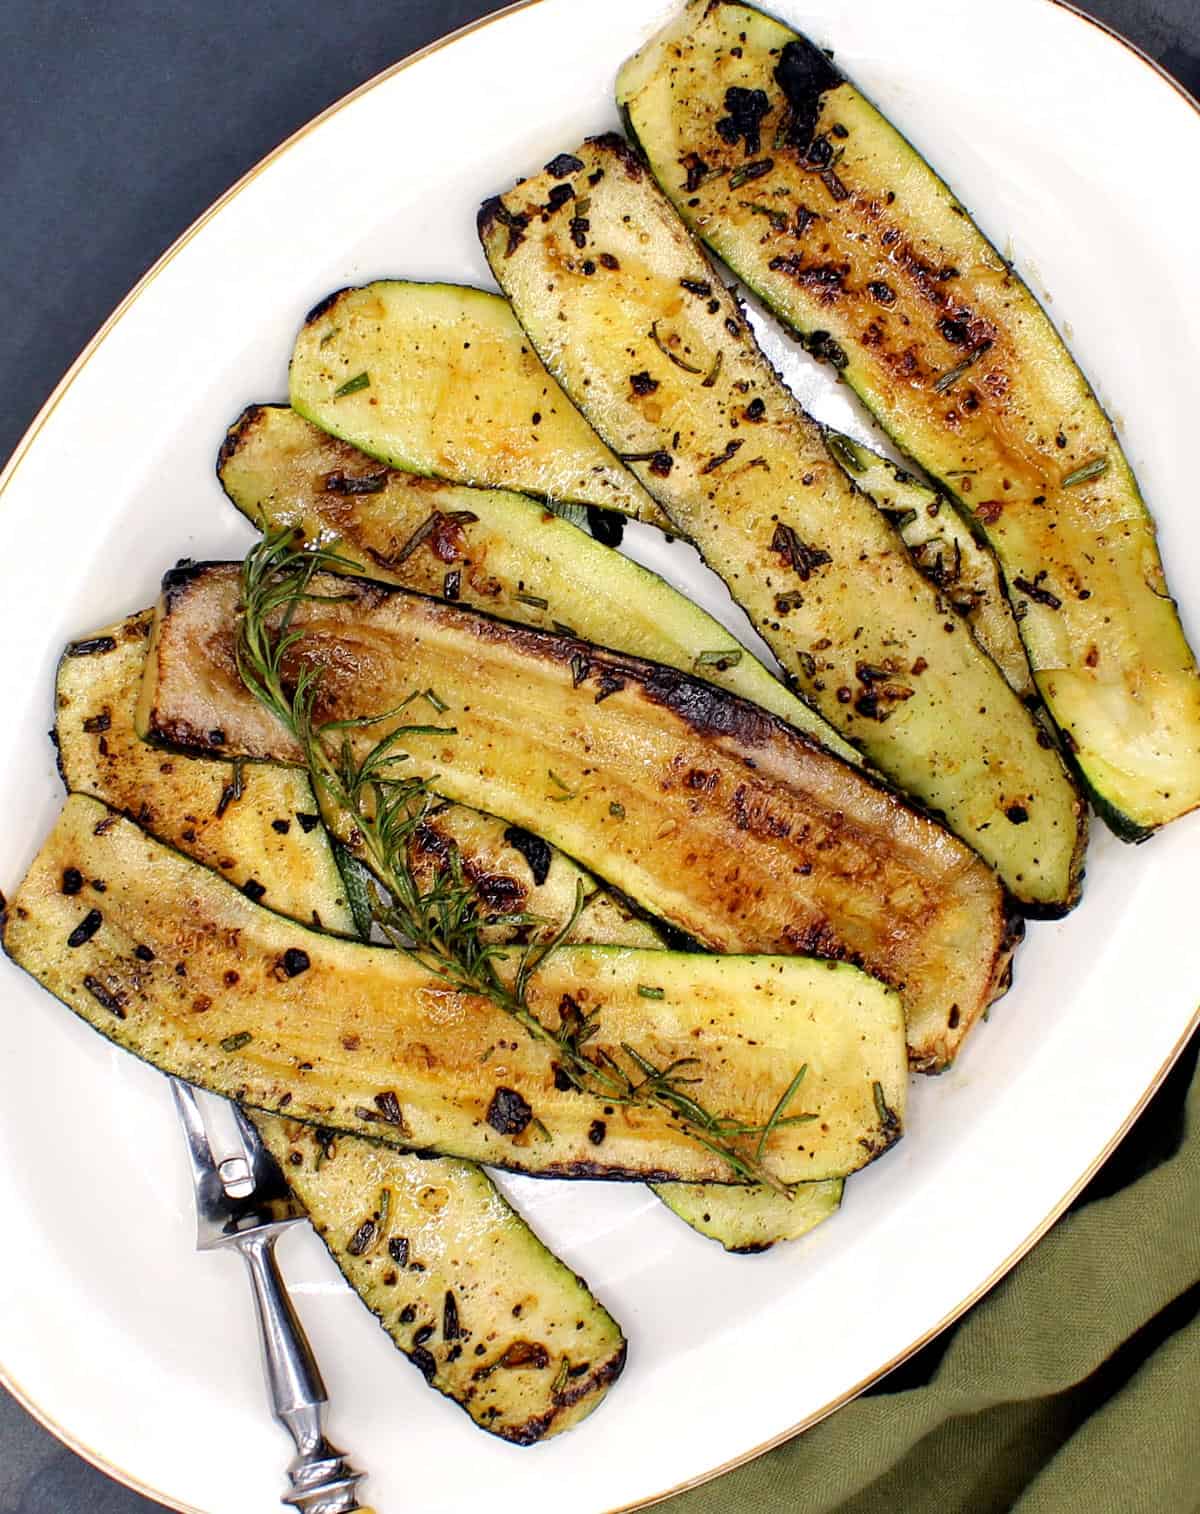 Overhead photo of slices of pan roasted, golden-brown zucchini in a white platter with a rosemary sprig.